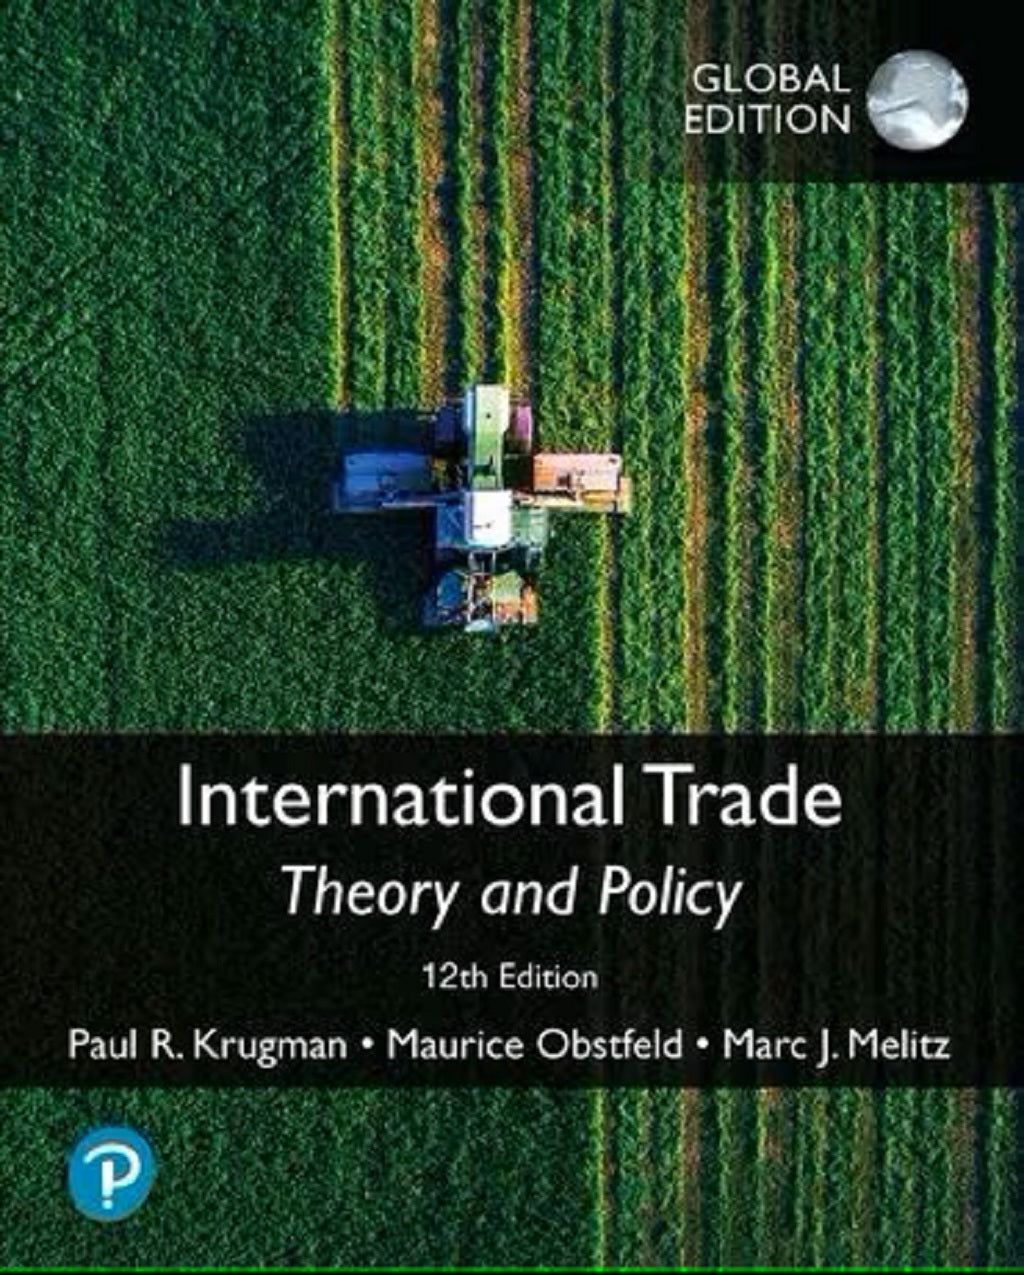 MyLab Economics with Pearson eText for International Trade: Theory and Policy, 12th Global Edition